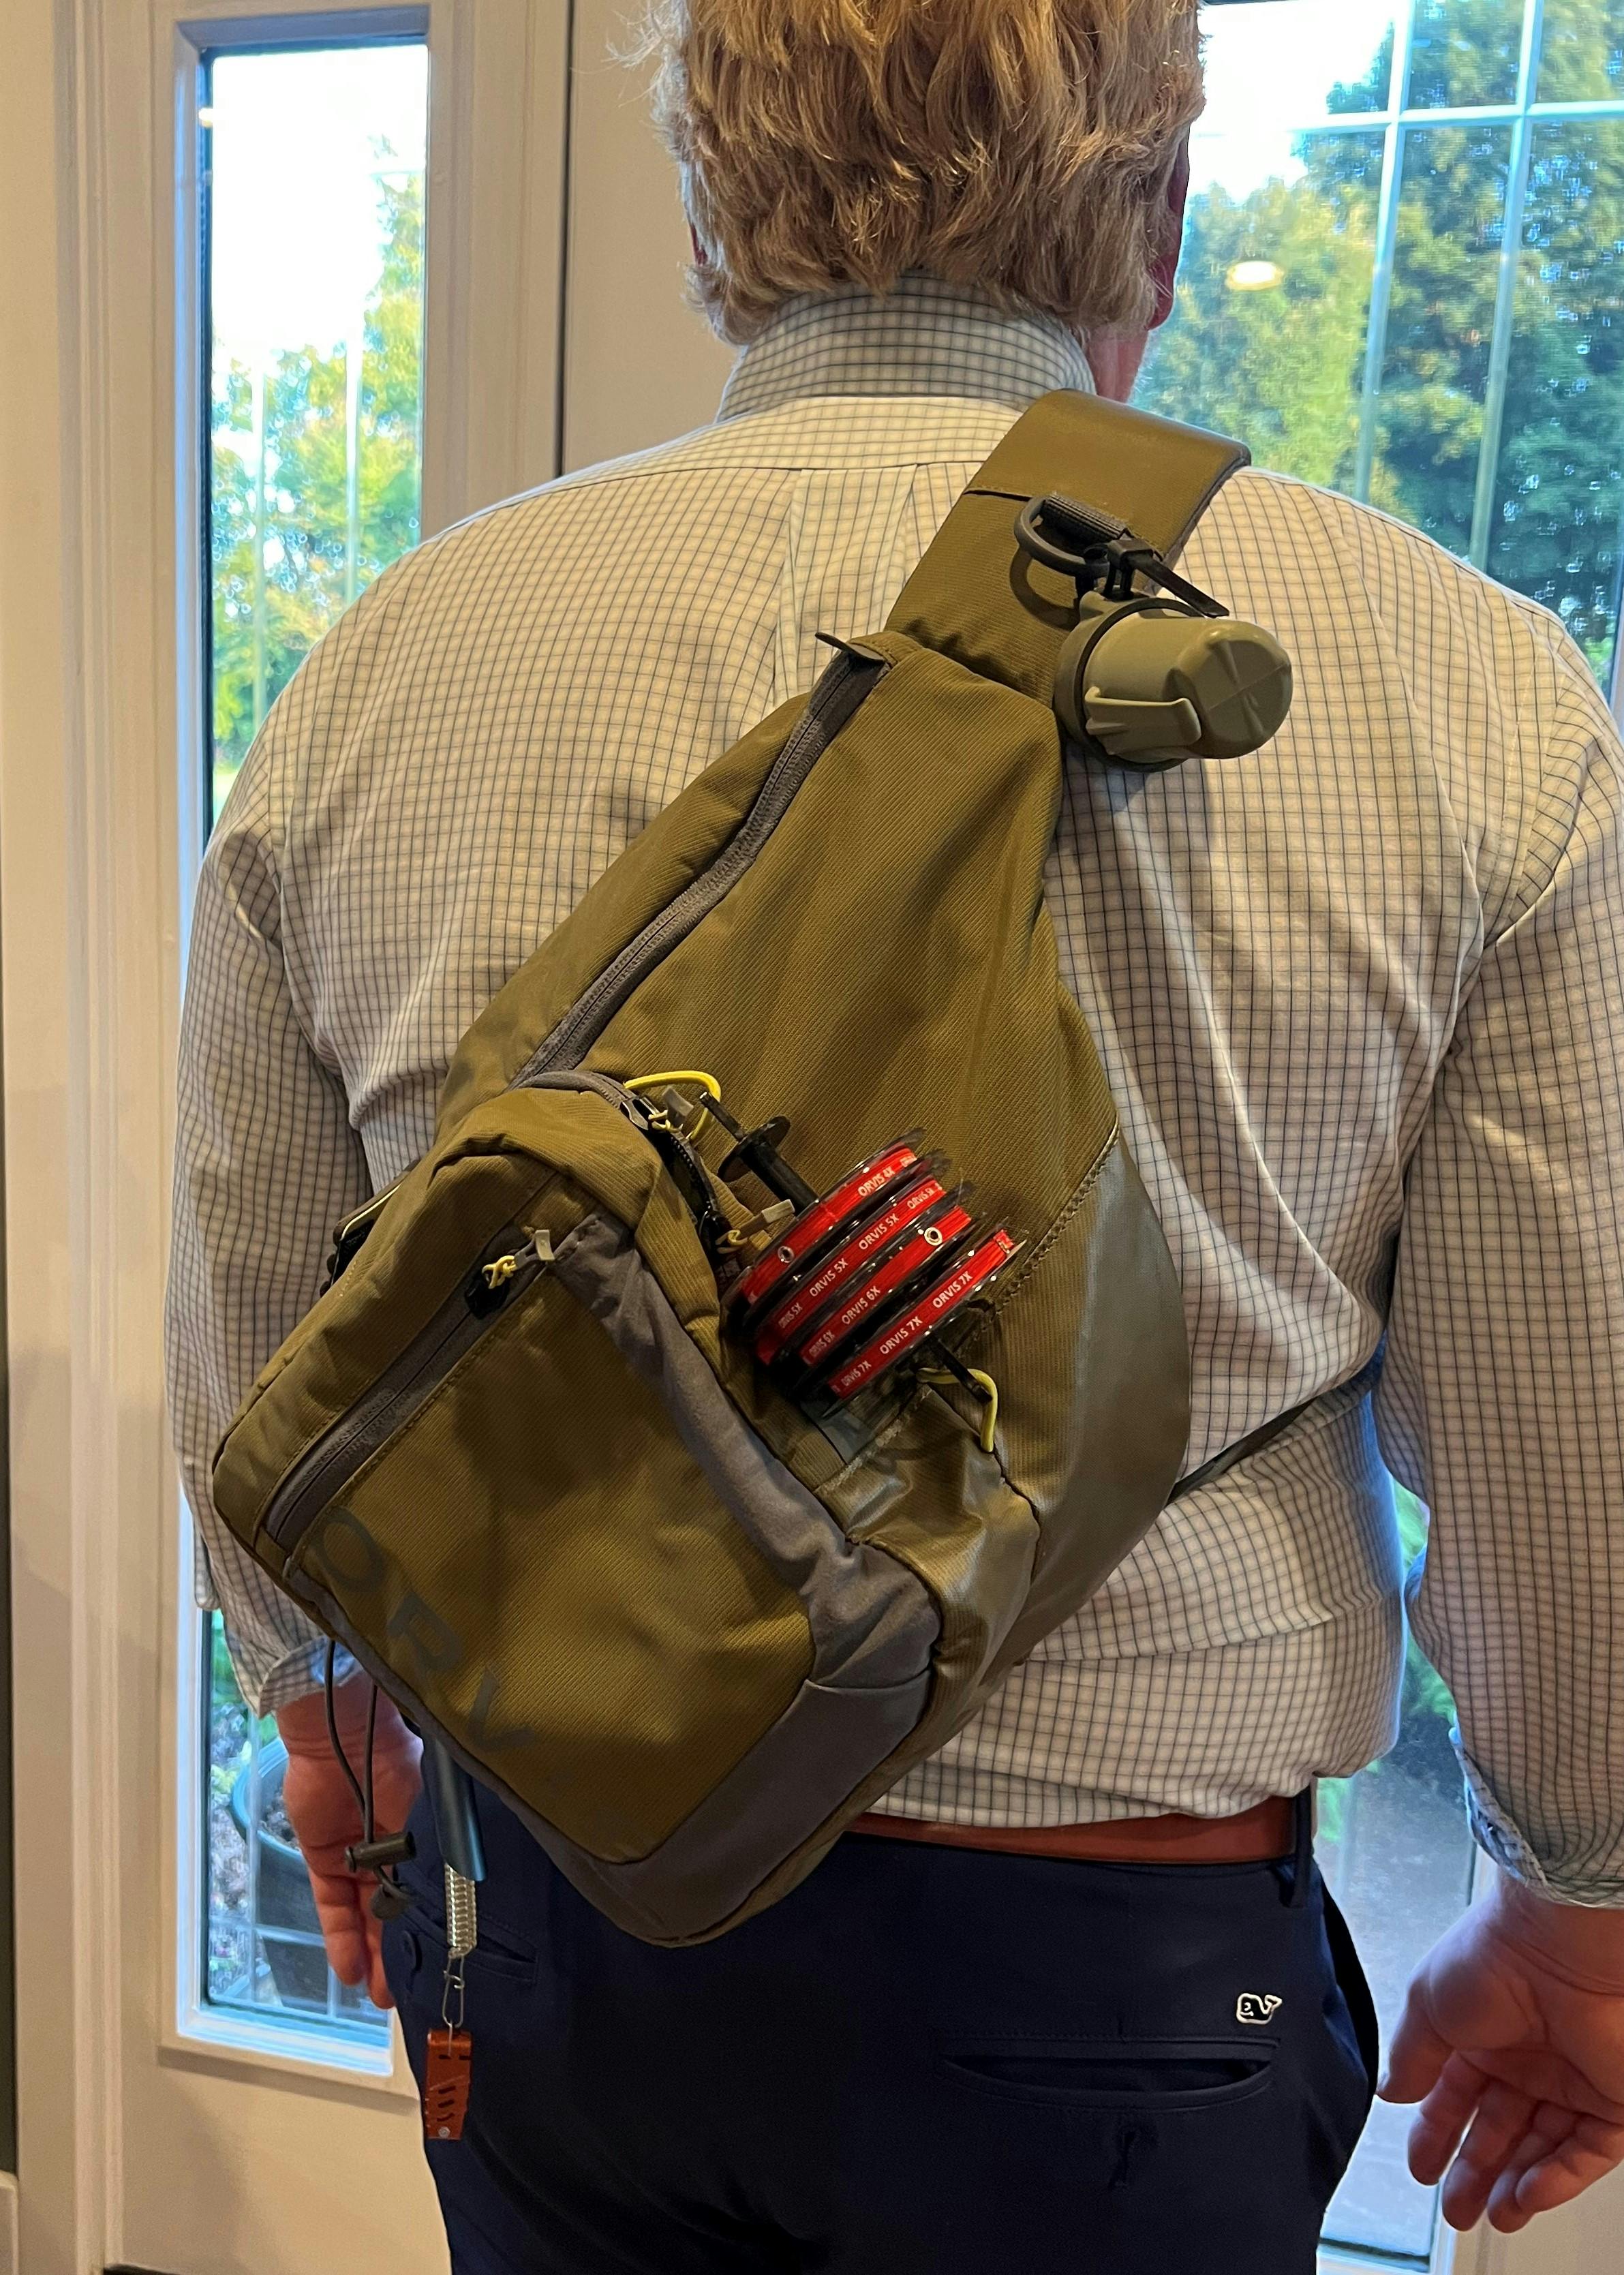 Compare Orvis Sling Pack Sizes, Features, and Benefits